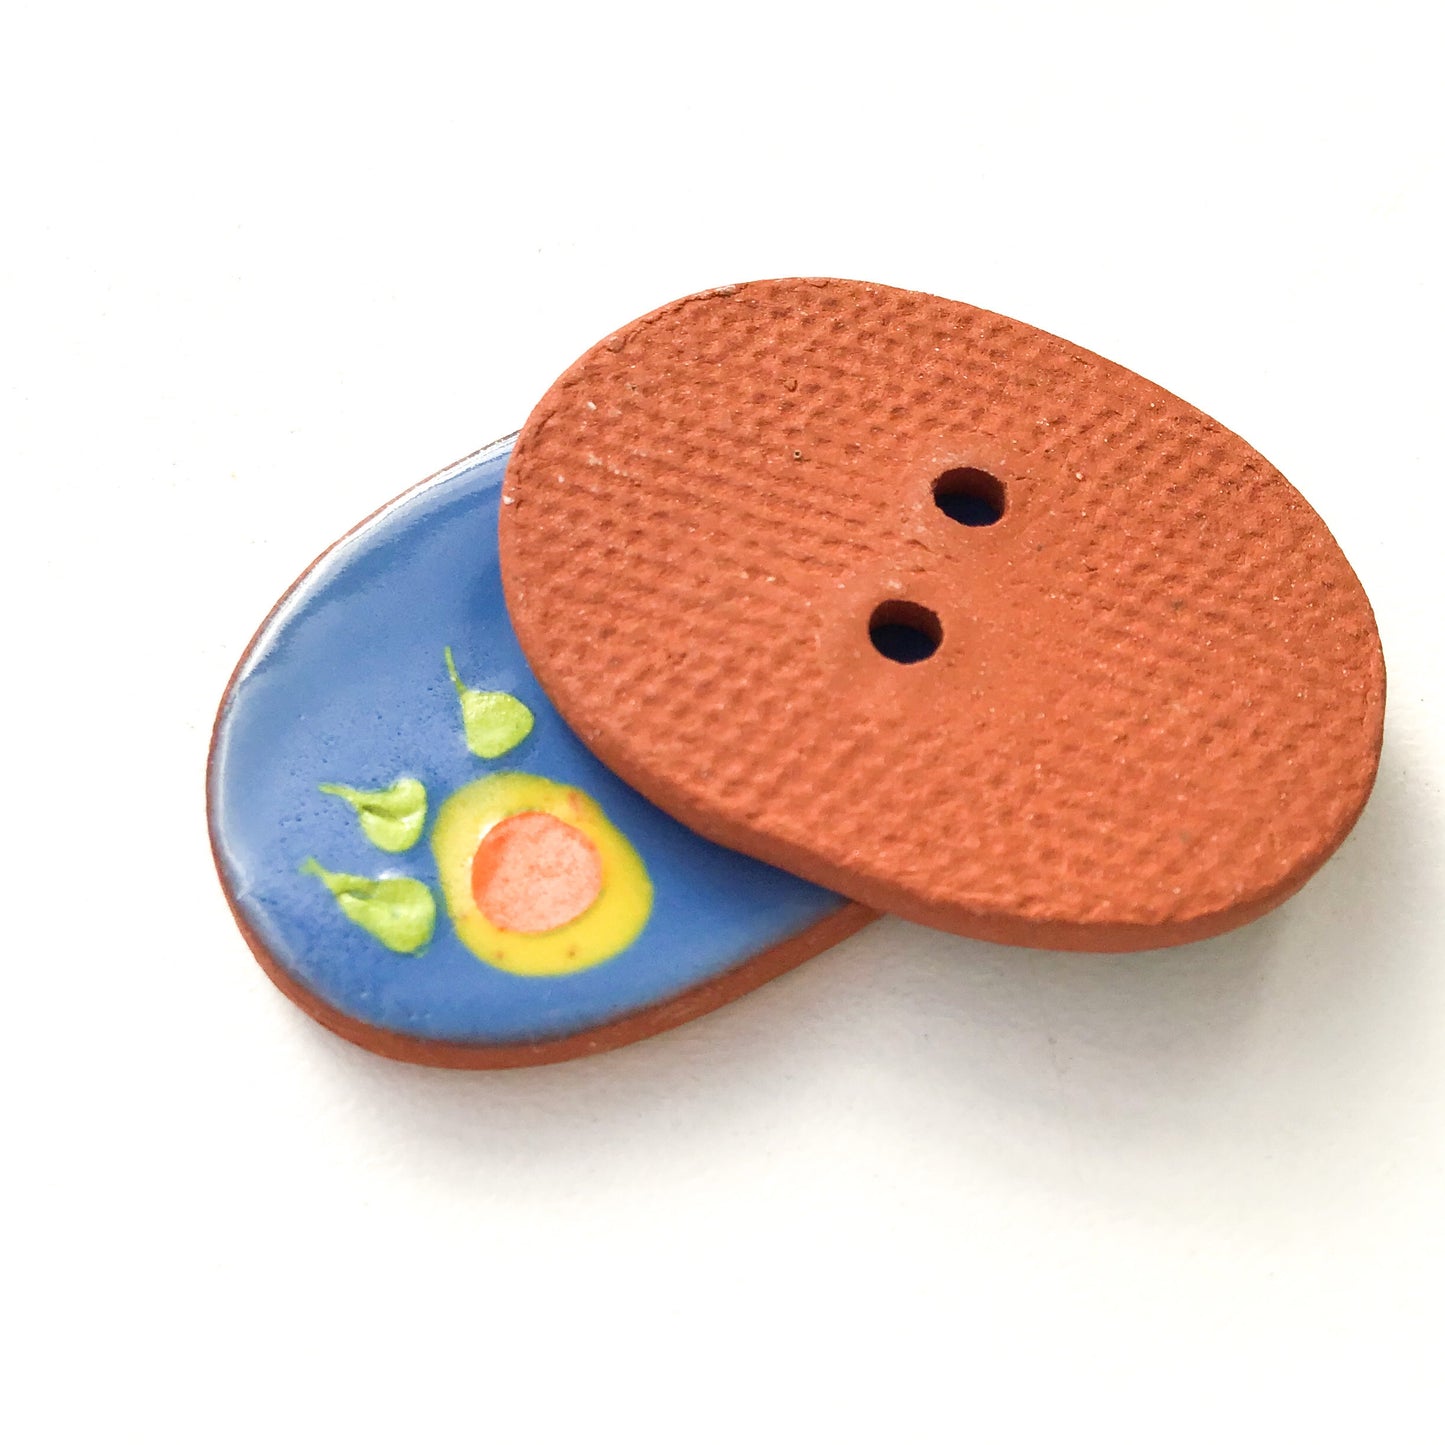 Celadon Blue Ceramic Buttons with Orange & Yellow Flowers - Oval Clay Buttons - 7/8" x 1 1/4"